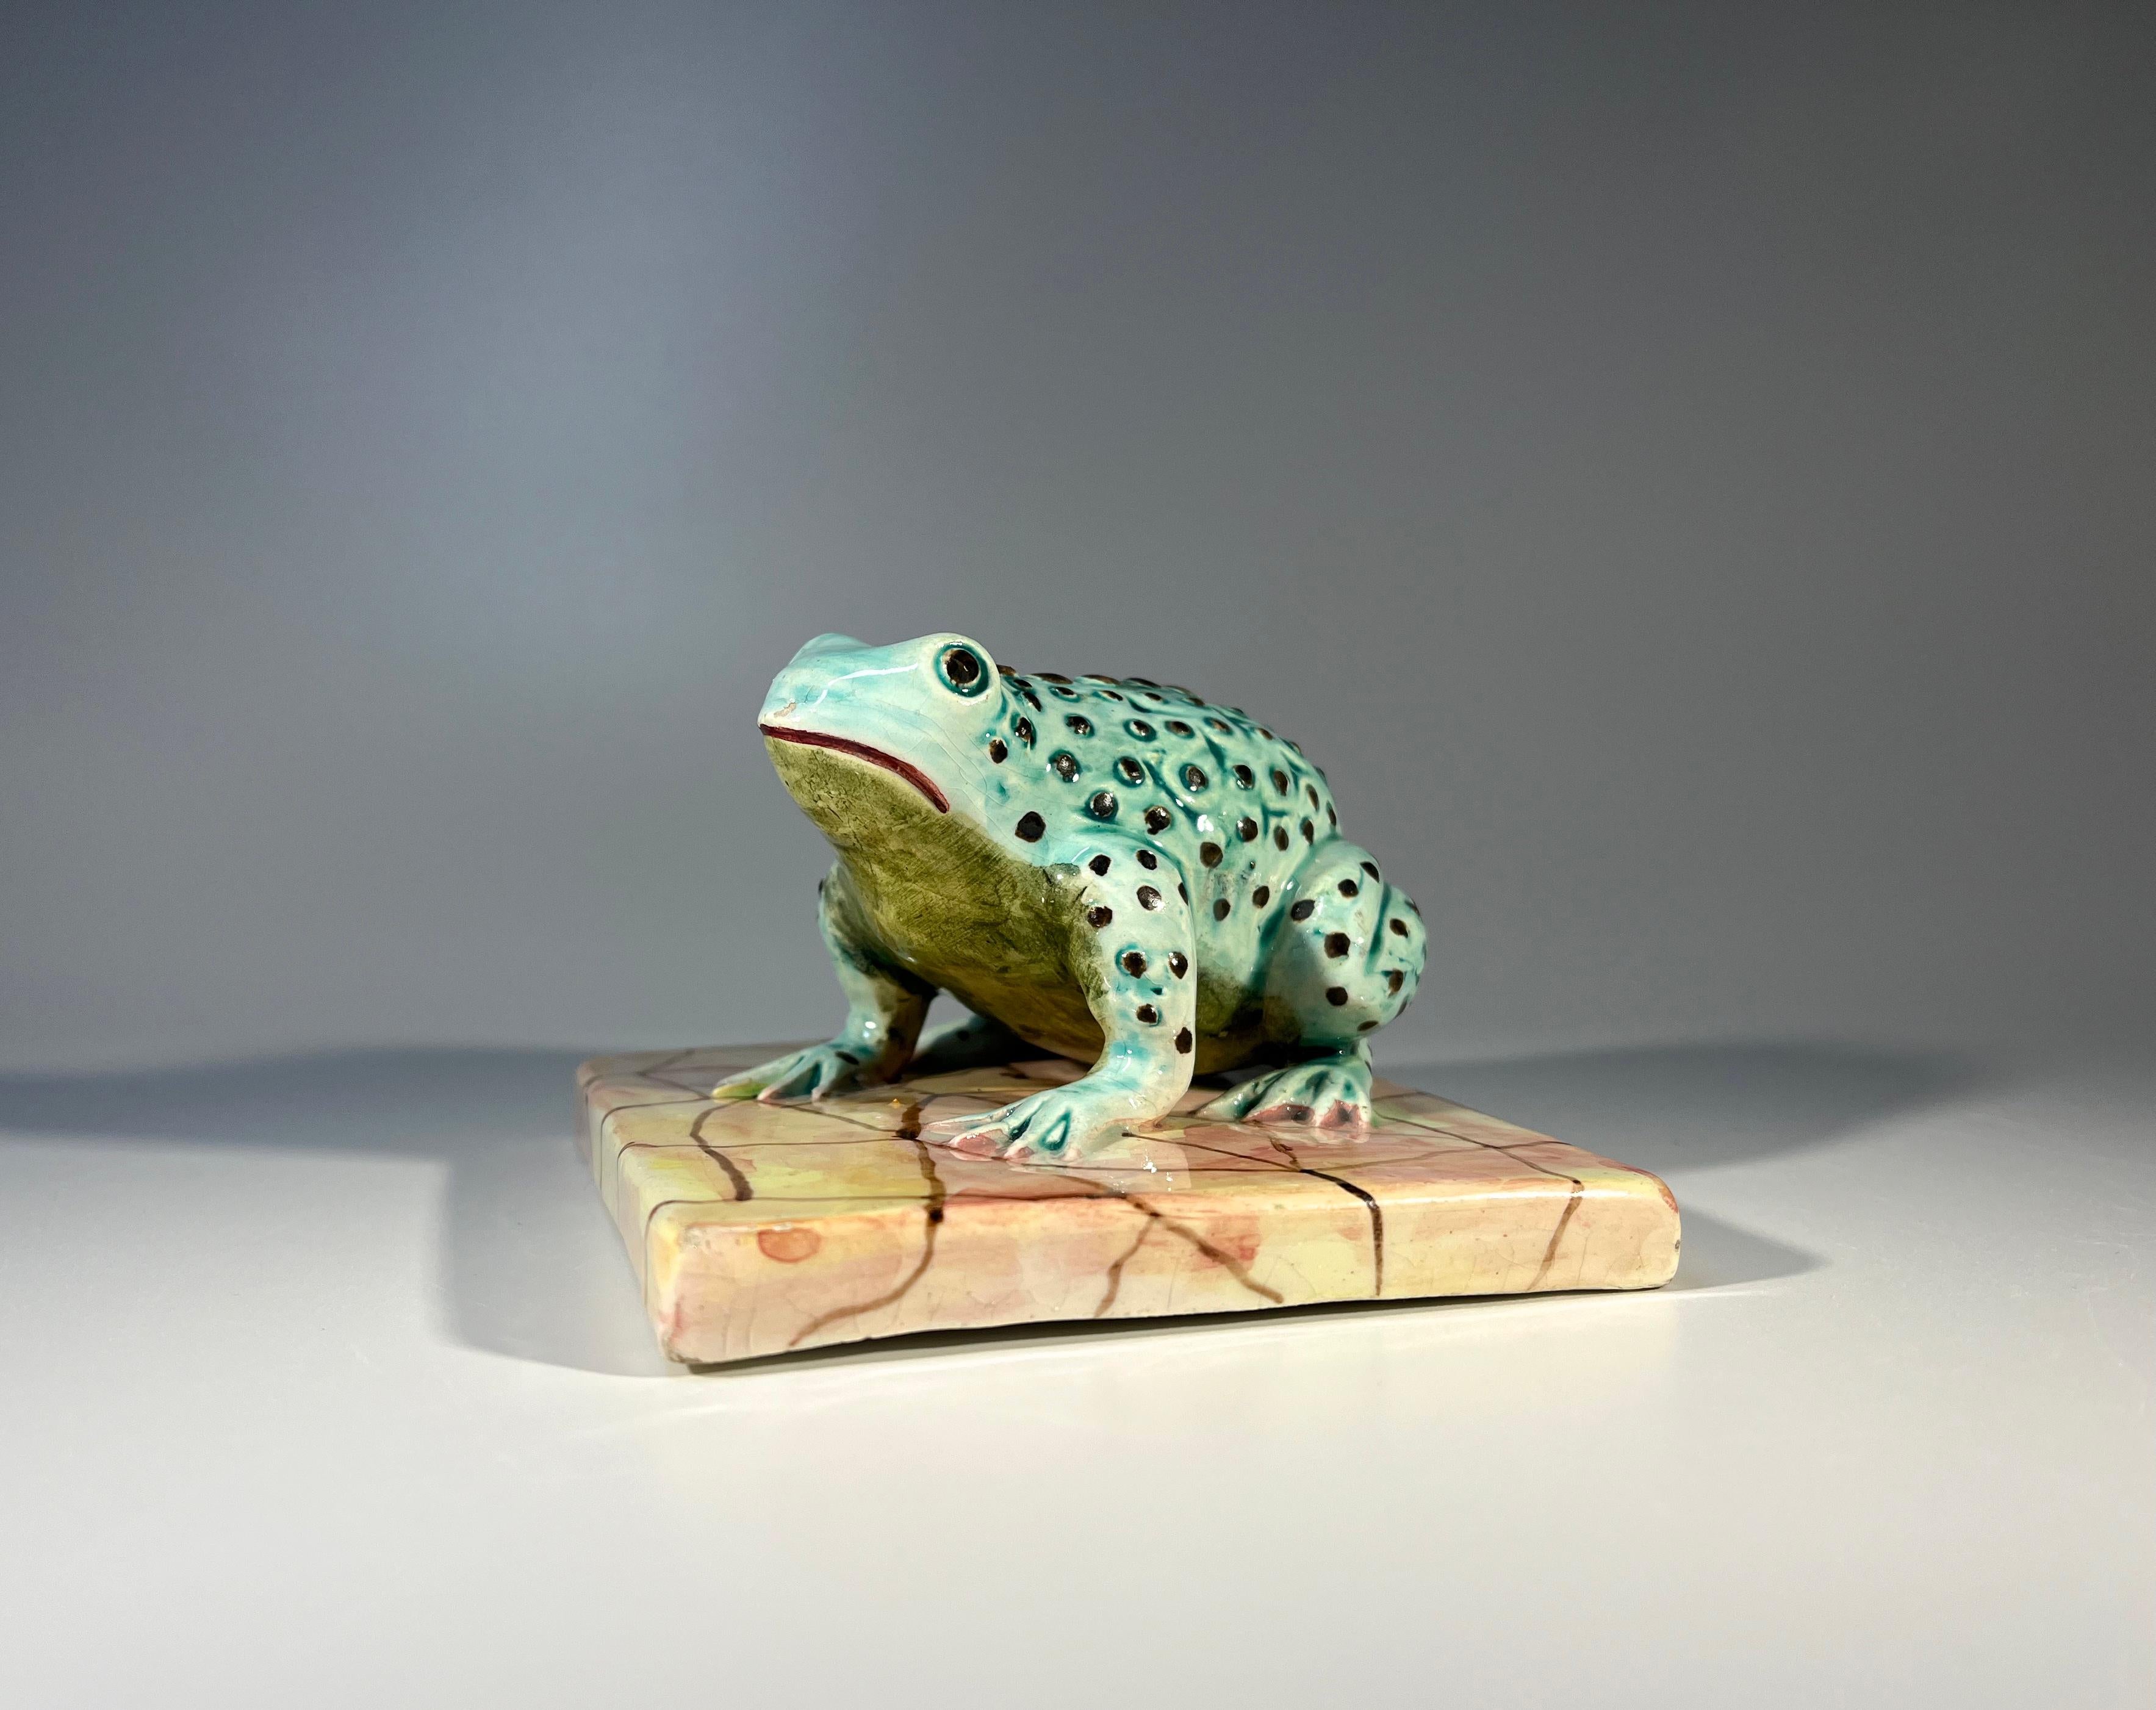 Hand-Painted Charming Italian Ceramic Toad On A Tile c1960s For Sale